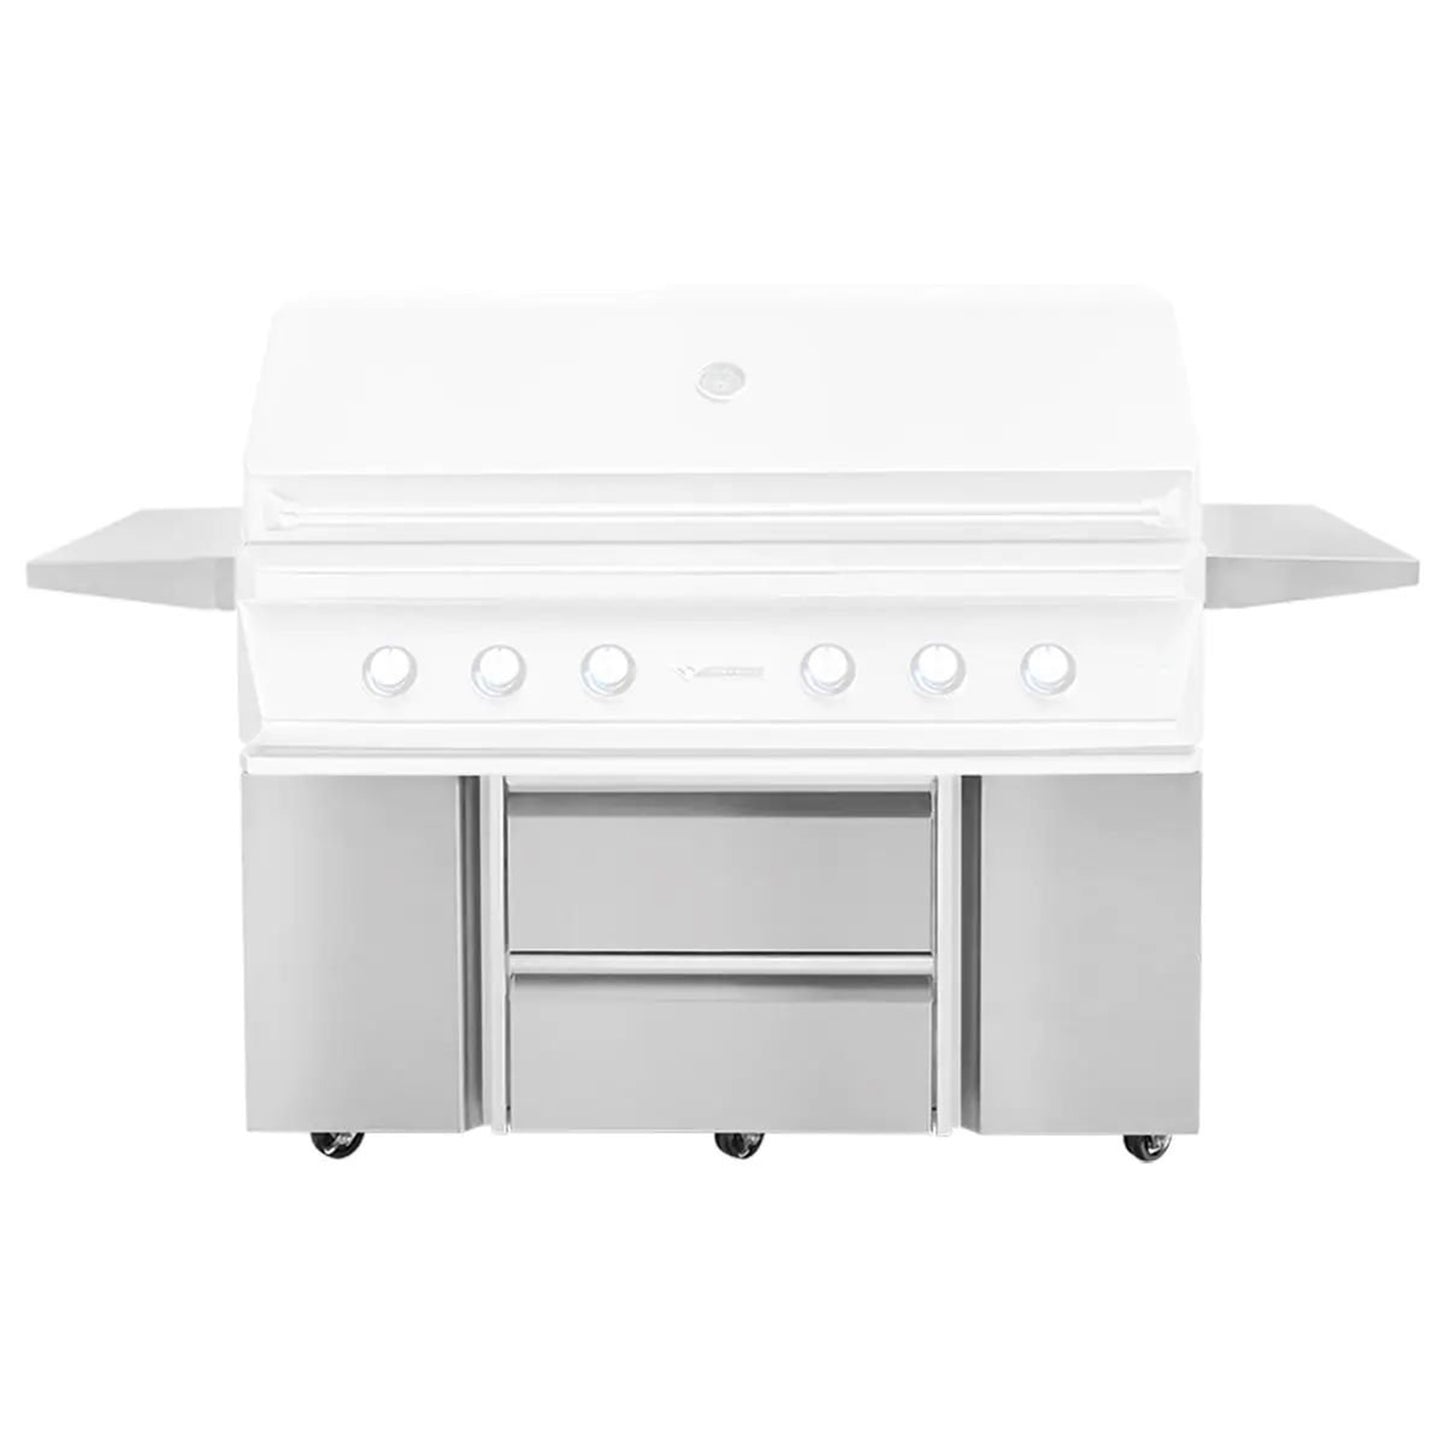 Twin Eagles 54-Inch Grill Base with Two Storage Drawers & Two Access Doors